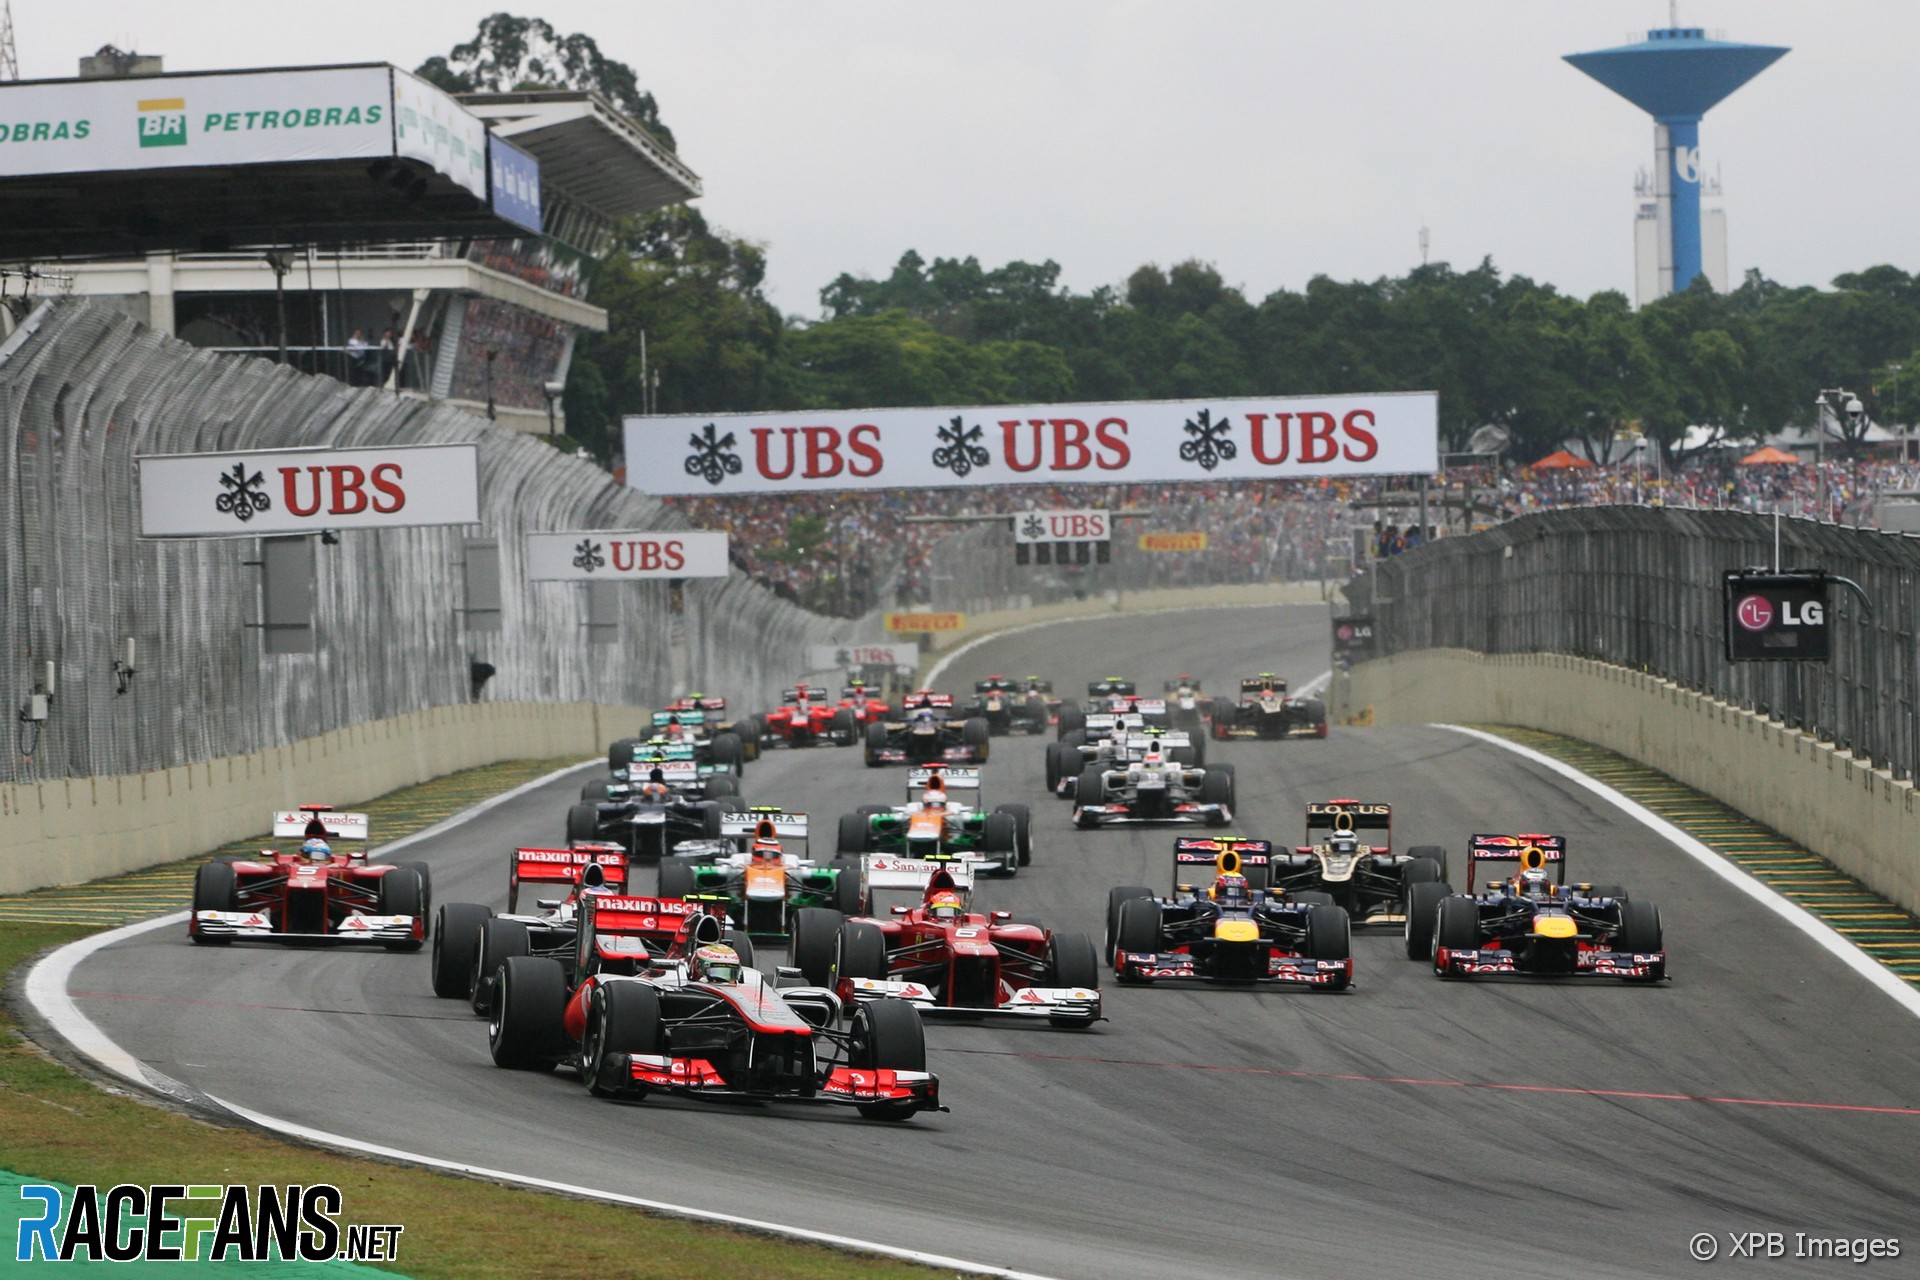 Lewis Hamilton leads at the start of the 2012 Brazilian Grand Prix